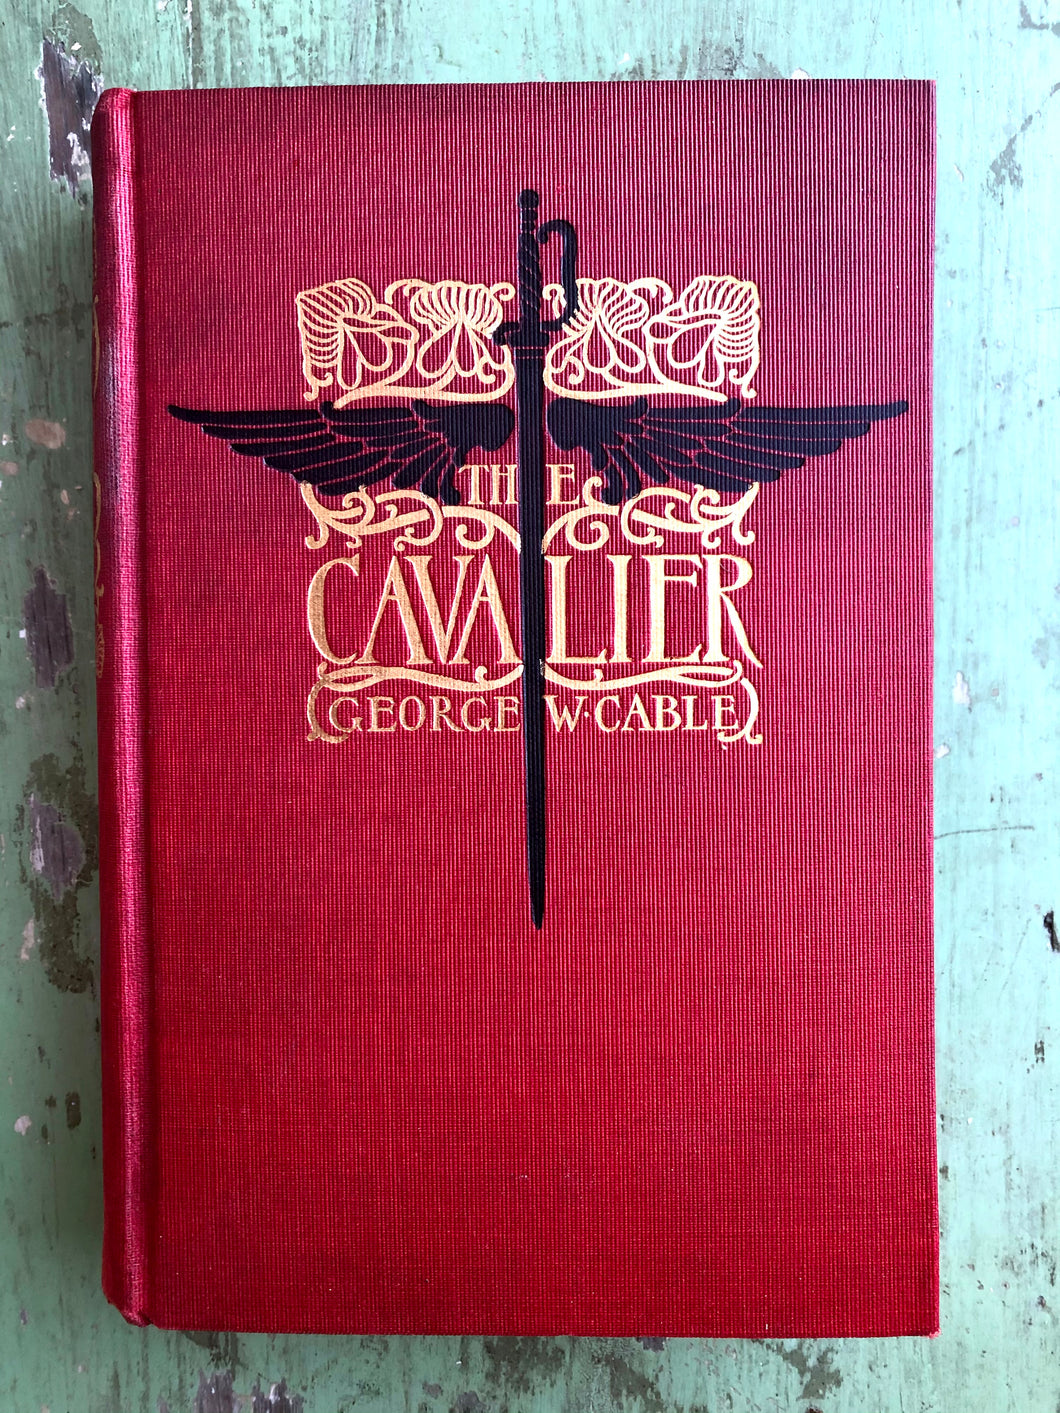 “The Cavalier” by George W. Gable and illustrated by Howard Chandler Christy